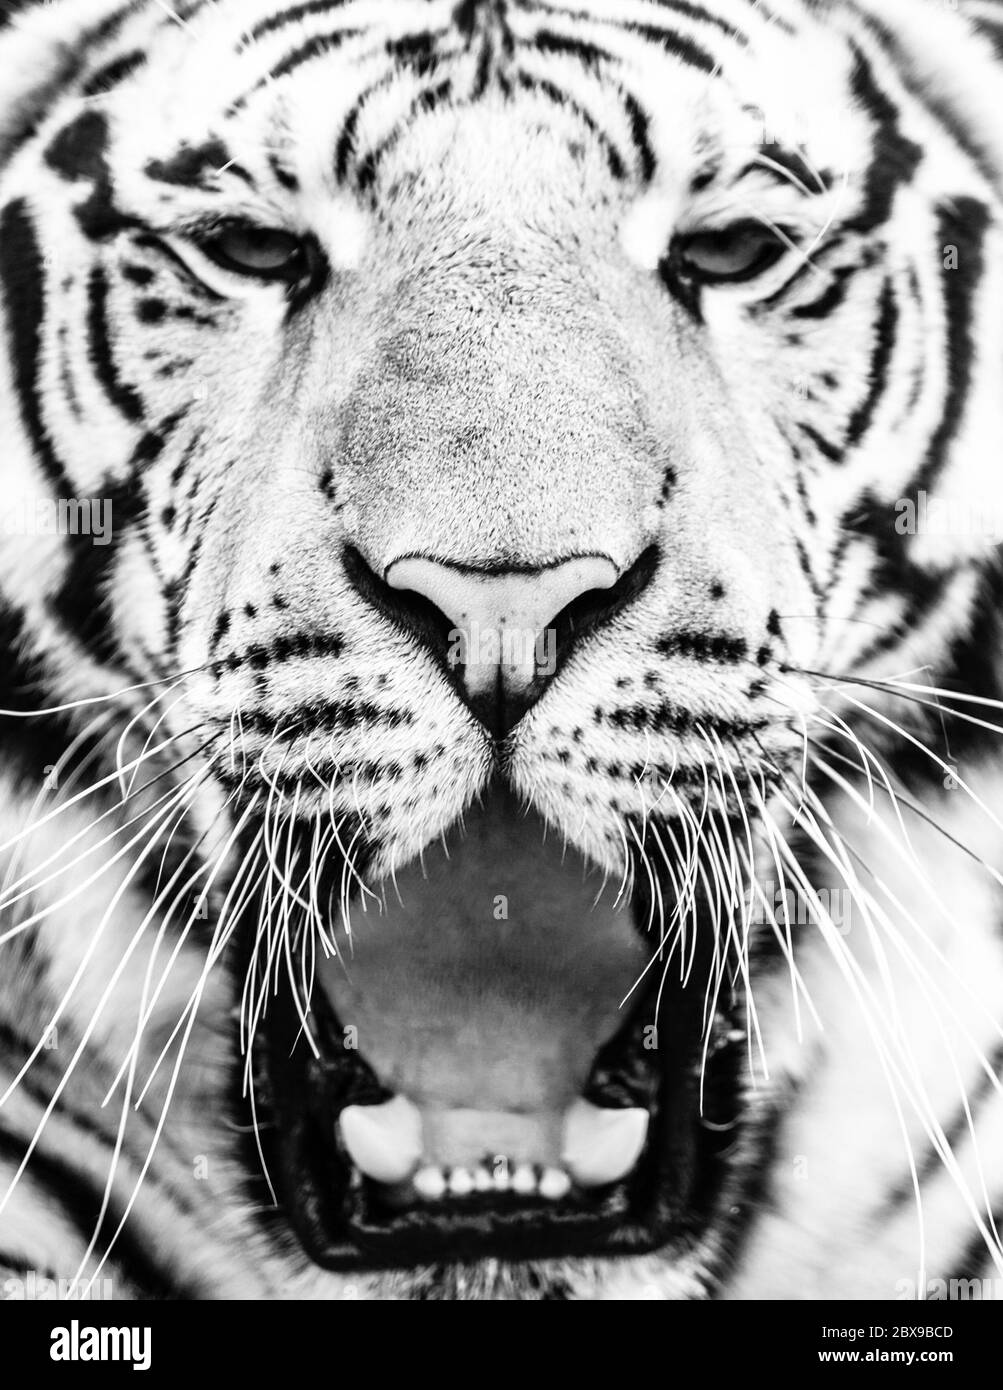 Young siberian tiger portrait with open mouth and sharp teeth. Black and white image. Stock Photo